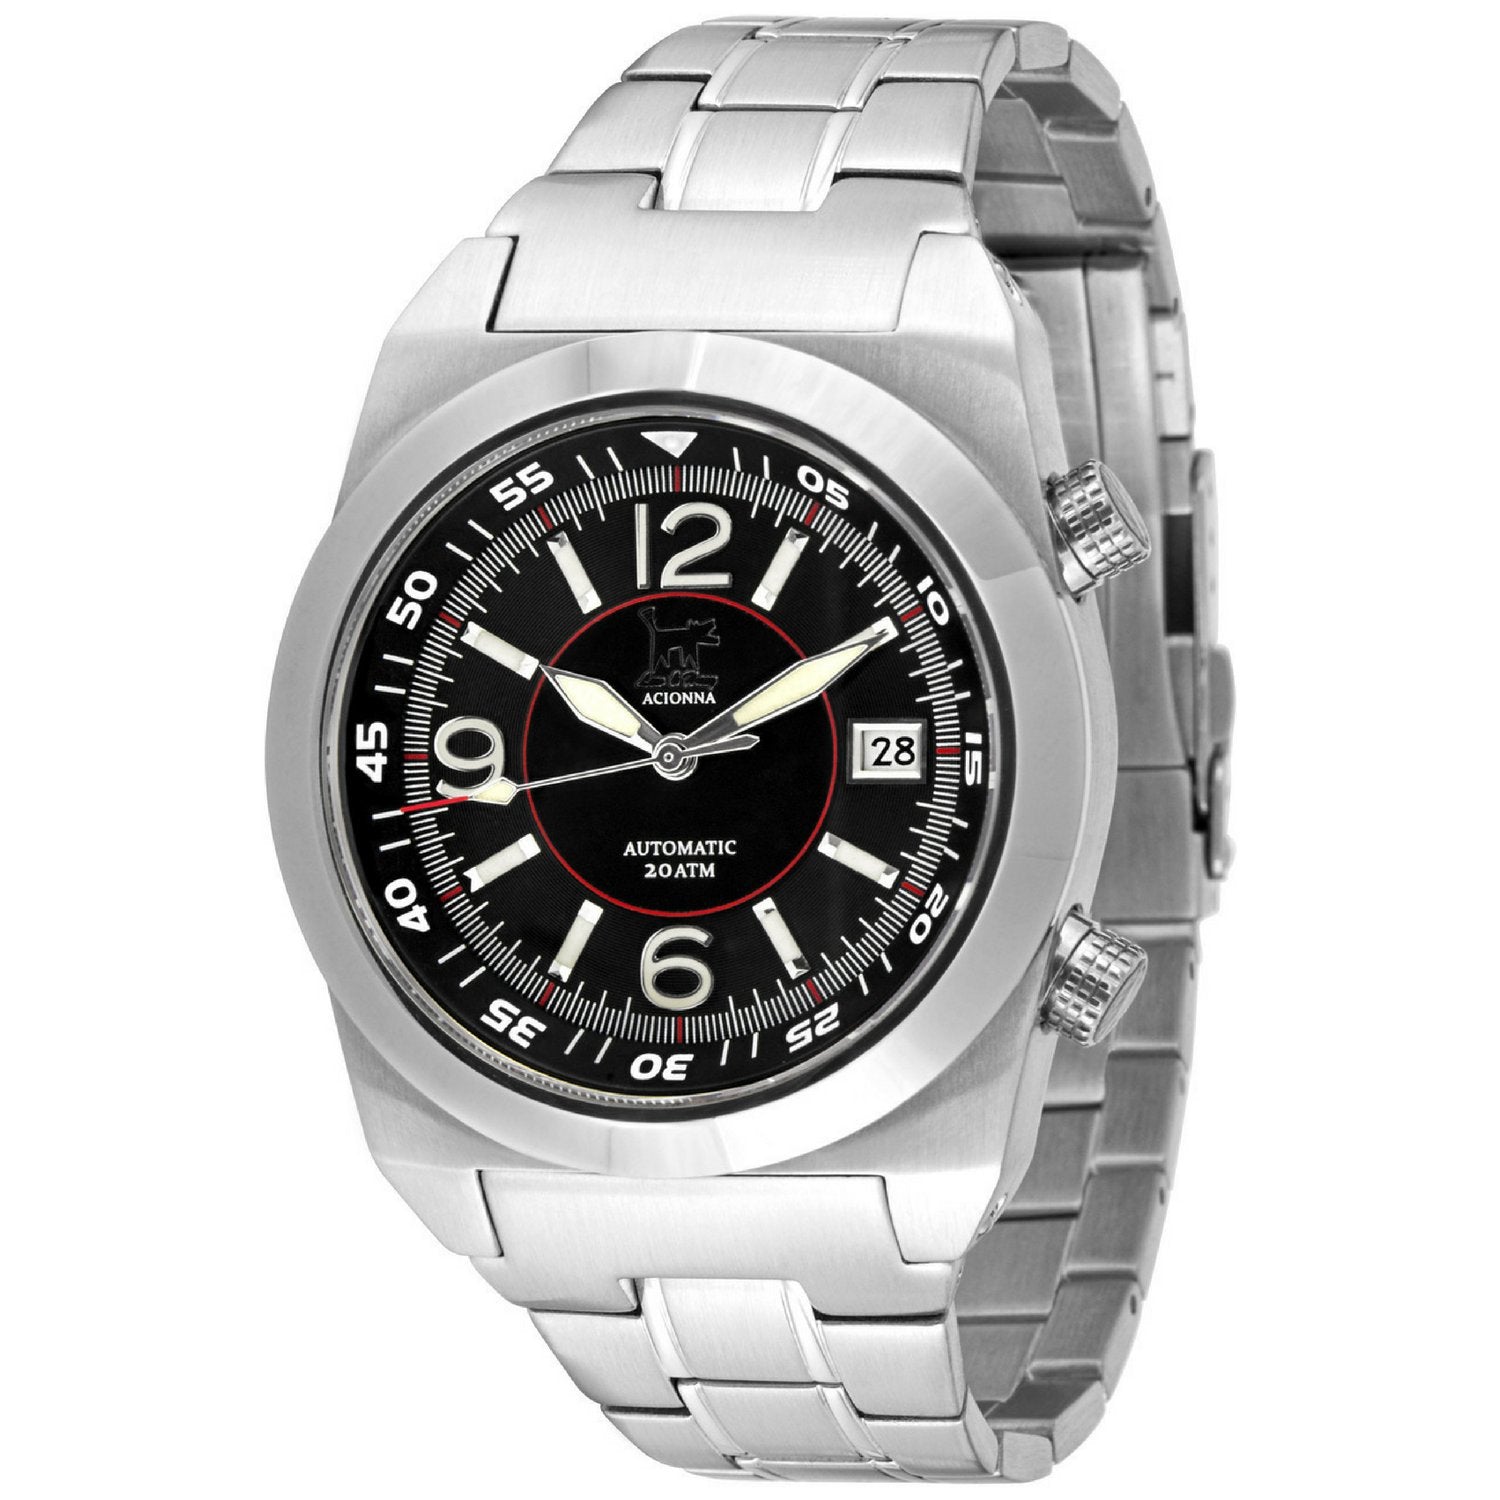 Lew and Huey Acionna Automatic Watch (Black, White & Red)